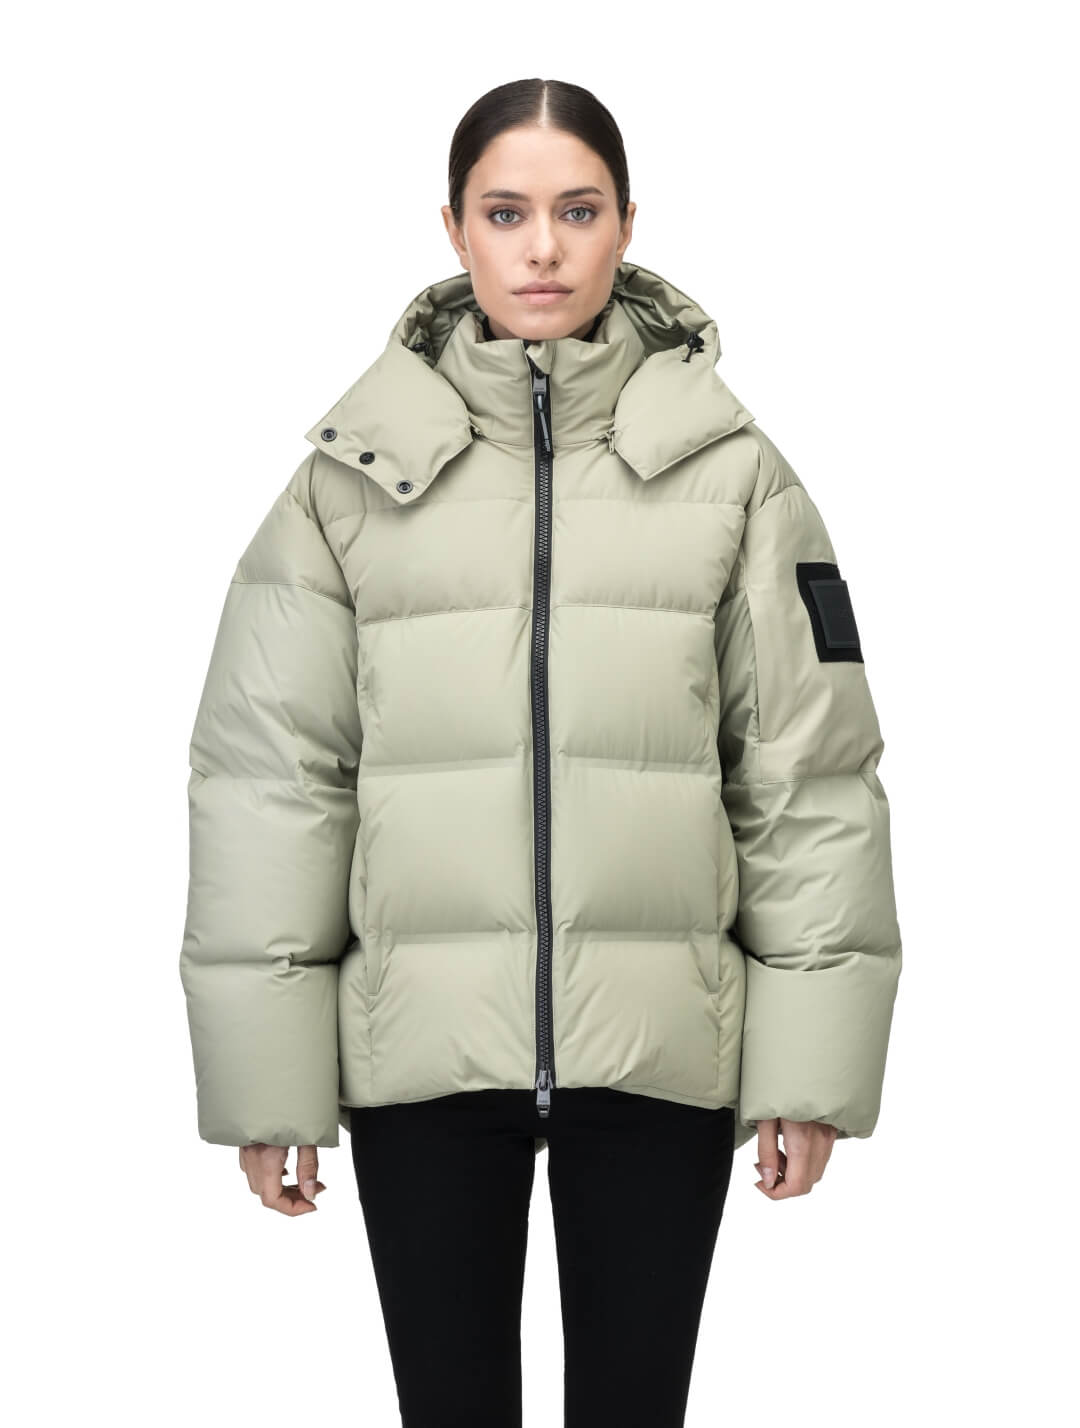 Una Ladies Performance Puffer in hip length, Technical Taffeta and Durable Stretch Ripstop fabrication, Premium Canadian White Duck Down insulation, removable down filled hood, centre front two-way zipper, and side-entry pockets at waist, in Tea